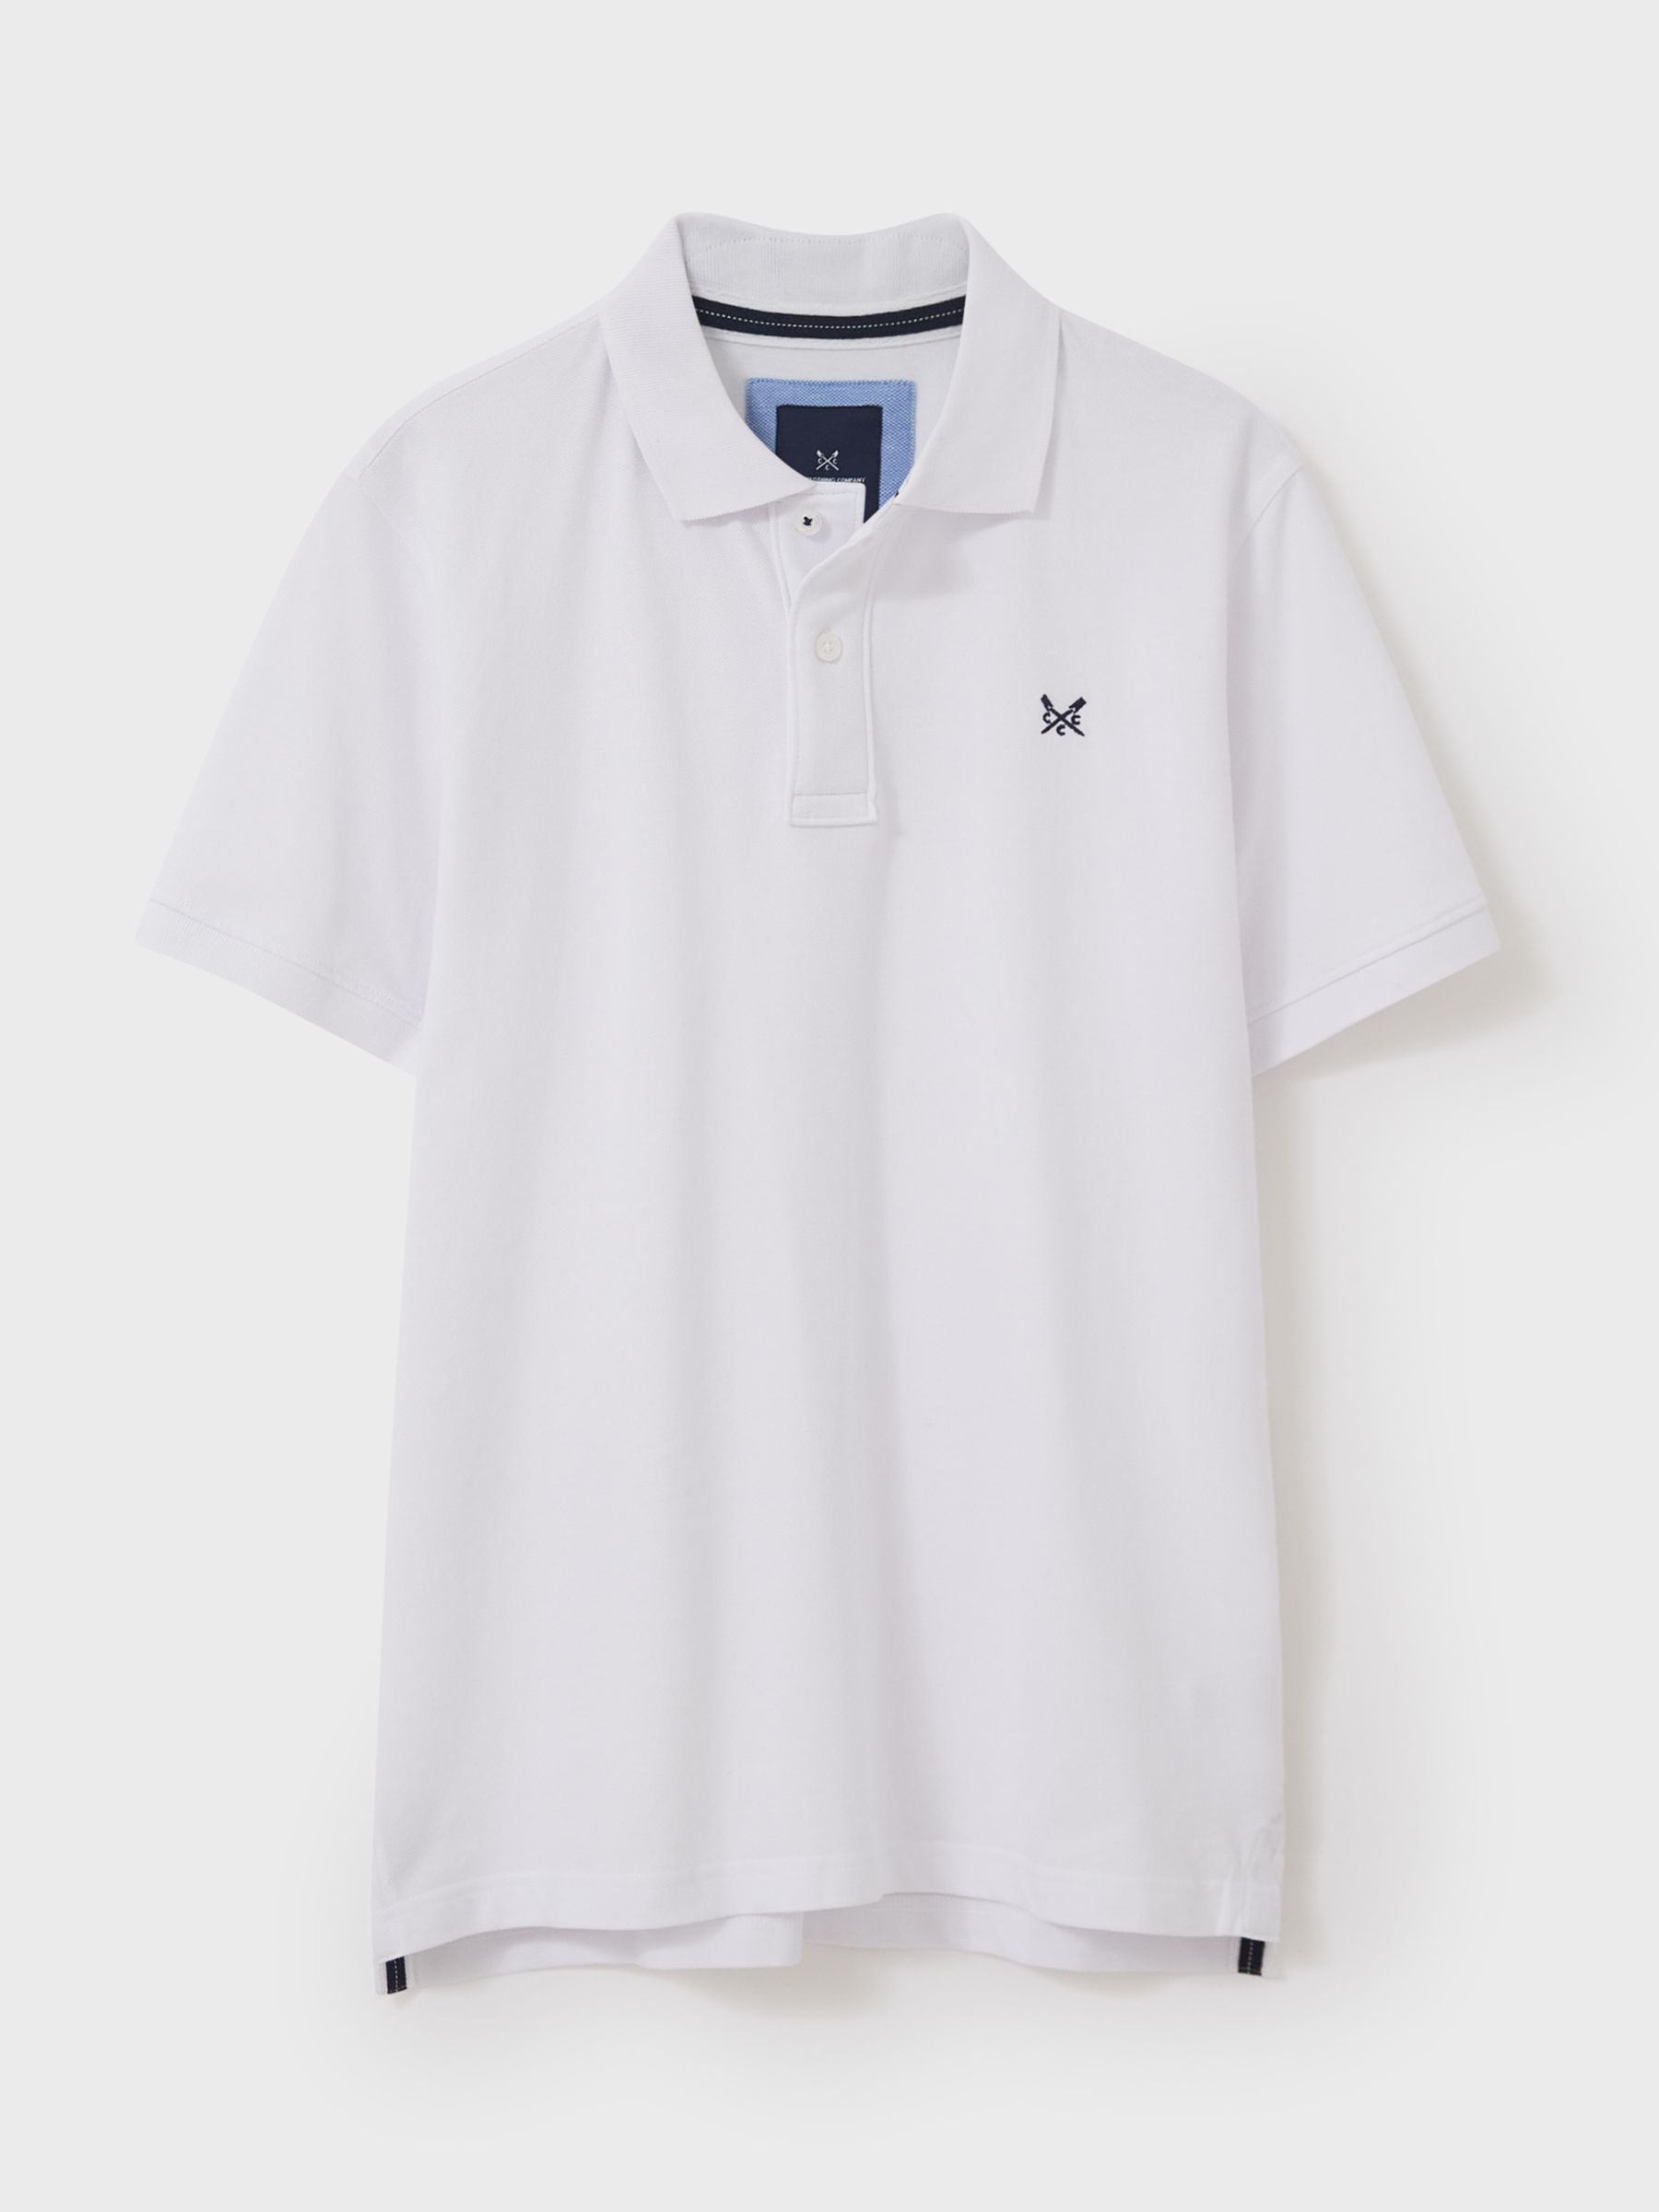 Crew Clothing Classic Pique Polo Shirt, White at John Lewis & Partners